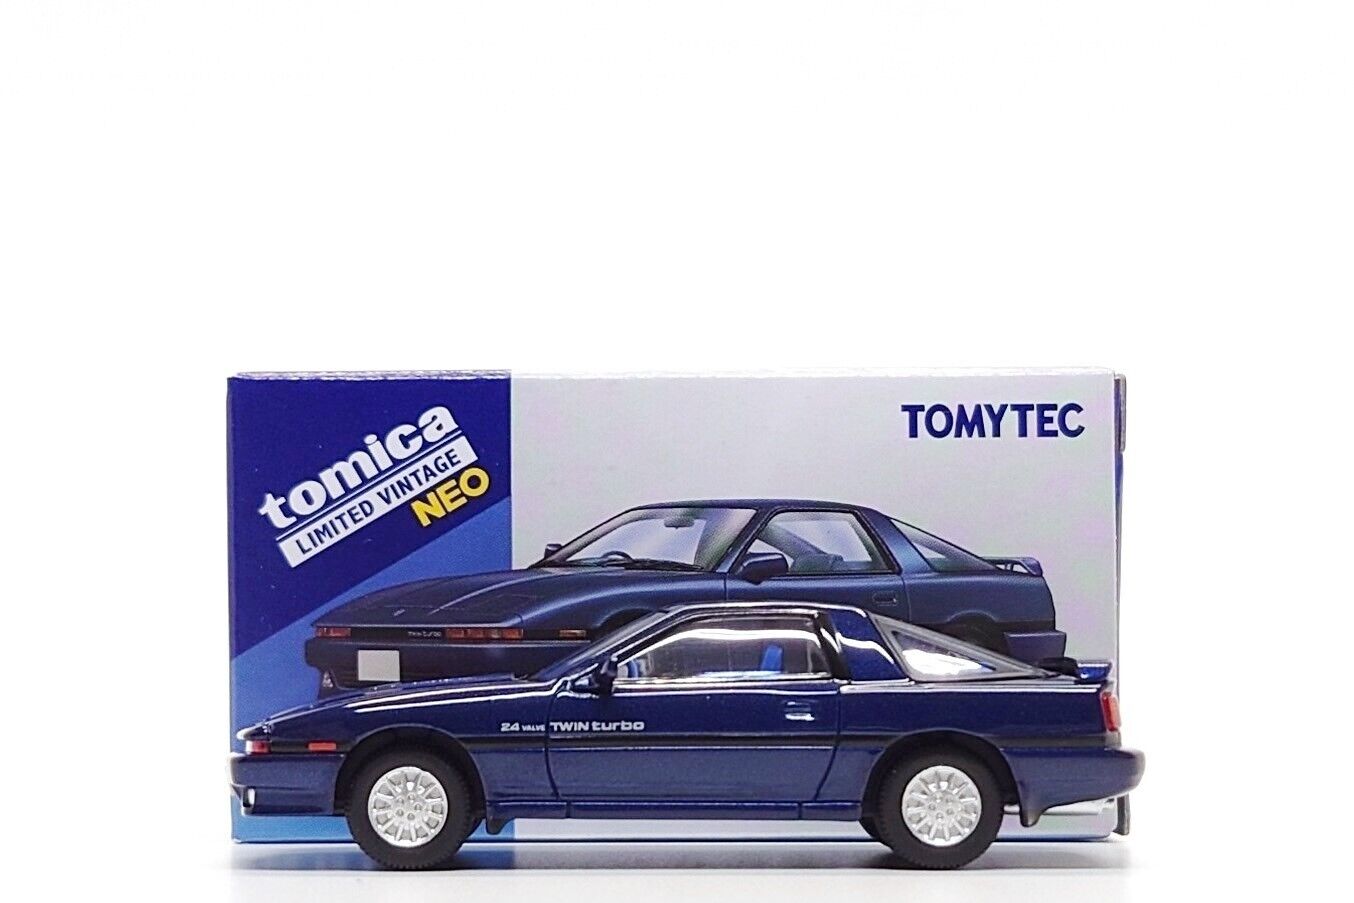 Tomica Limited Vintage Neo 1:64 Toyota Supra 2.0 GT Twin Turbo - Blue (LV-N106f)